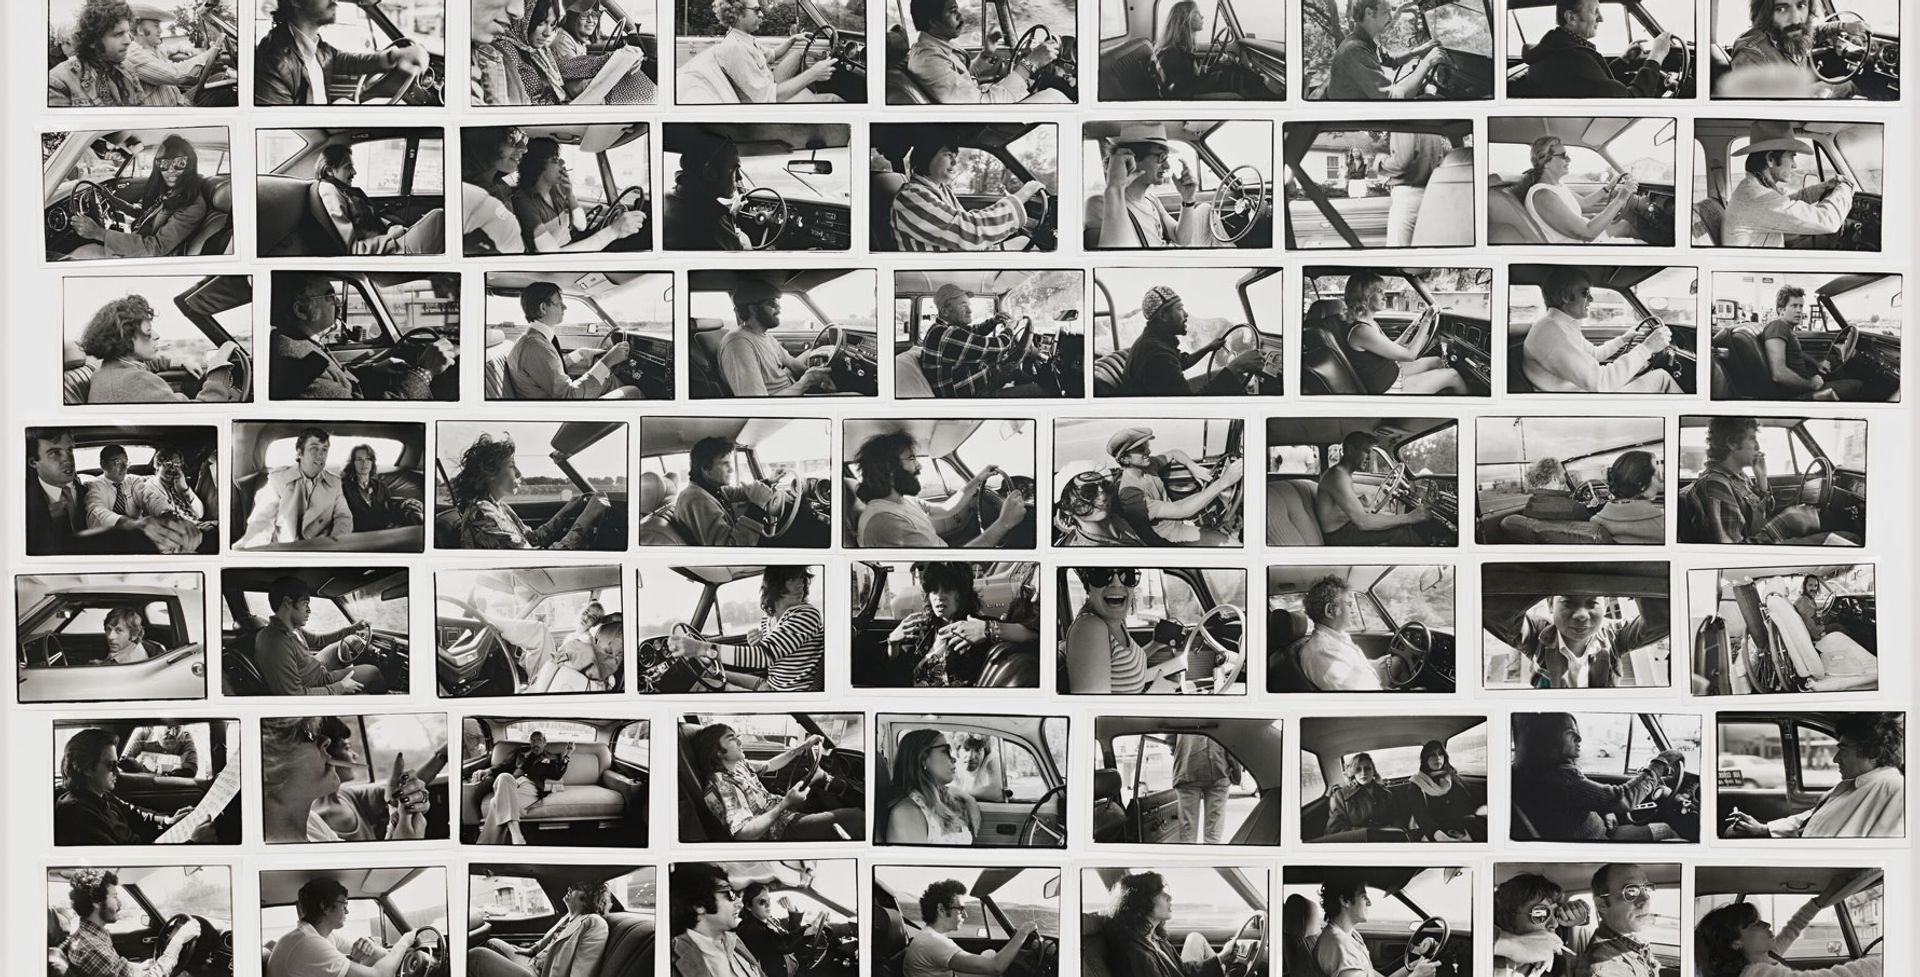 Driving Series, 1970-1984 (2019), a composite of 63 photos by Leibovitz, is on Hauser & Wirth's stand at Art Basel © Annie Leibovitz; courtesy of the artist and Hauser & Wirth; Photo: Genevieve Hanson